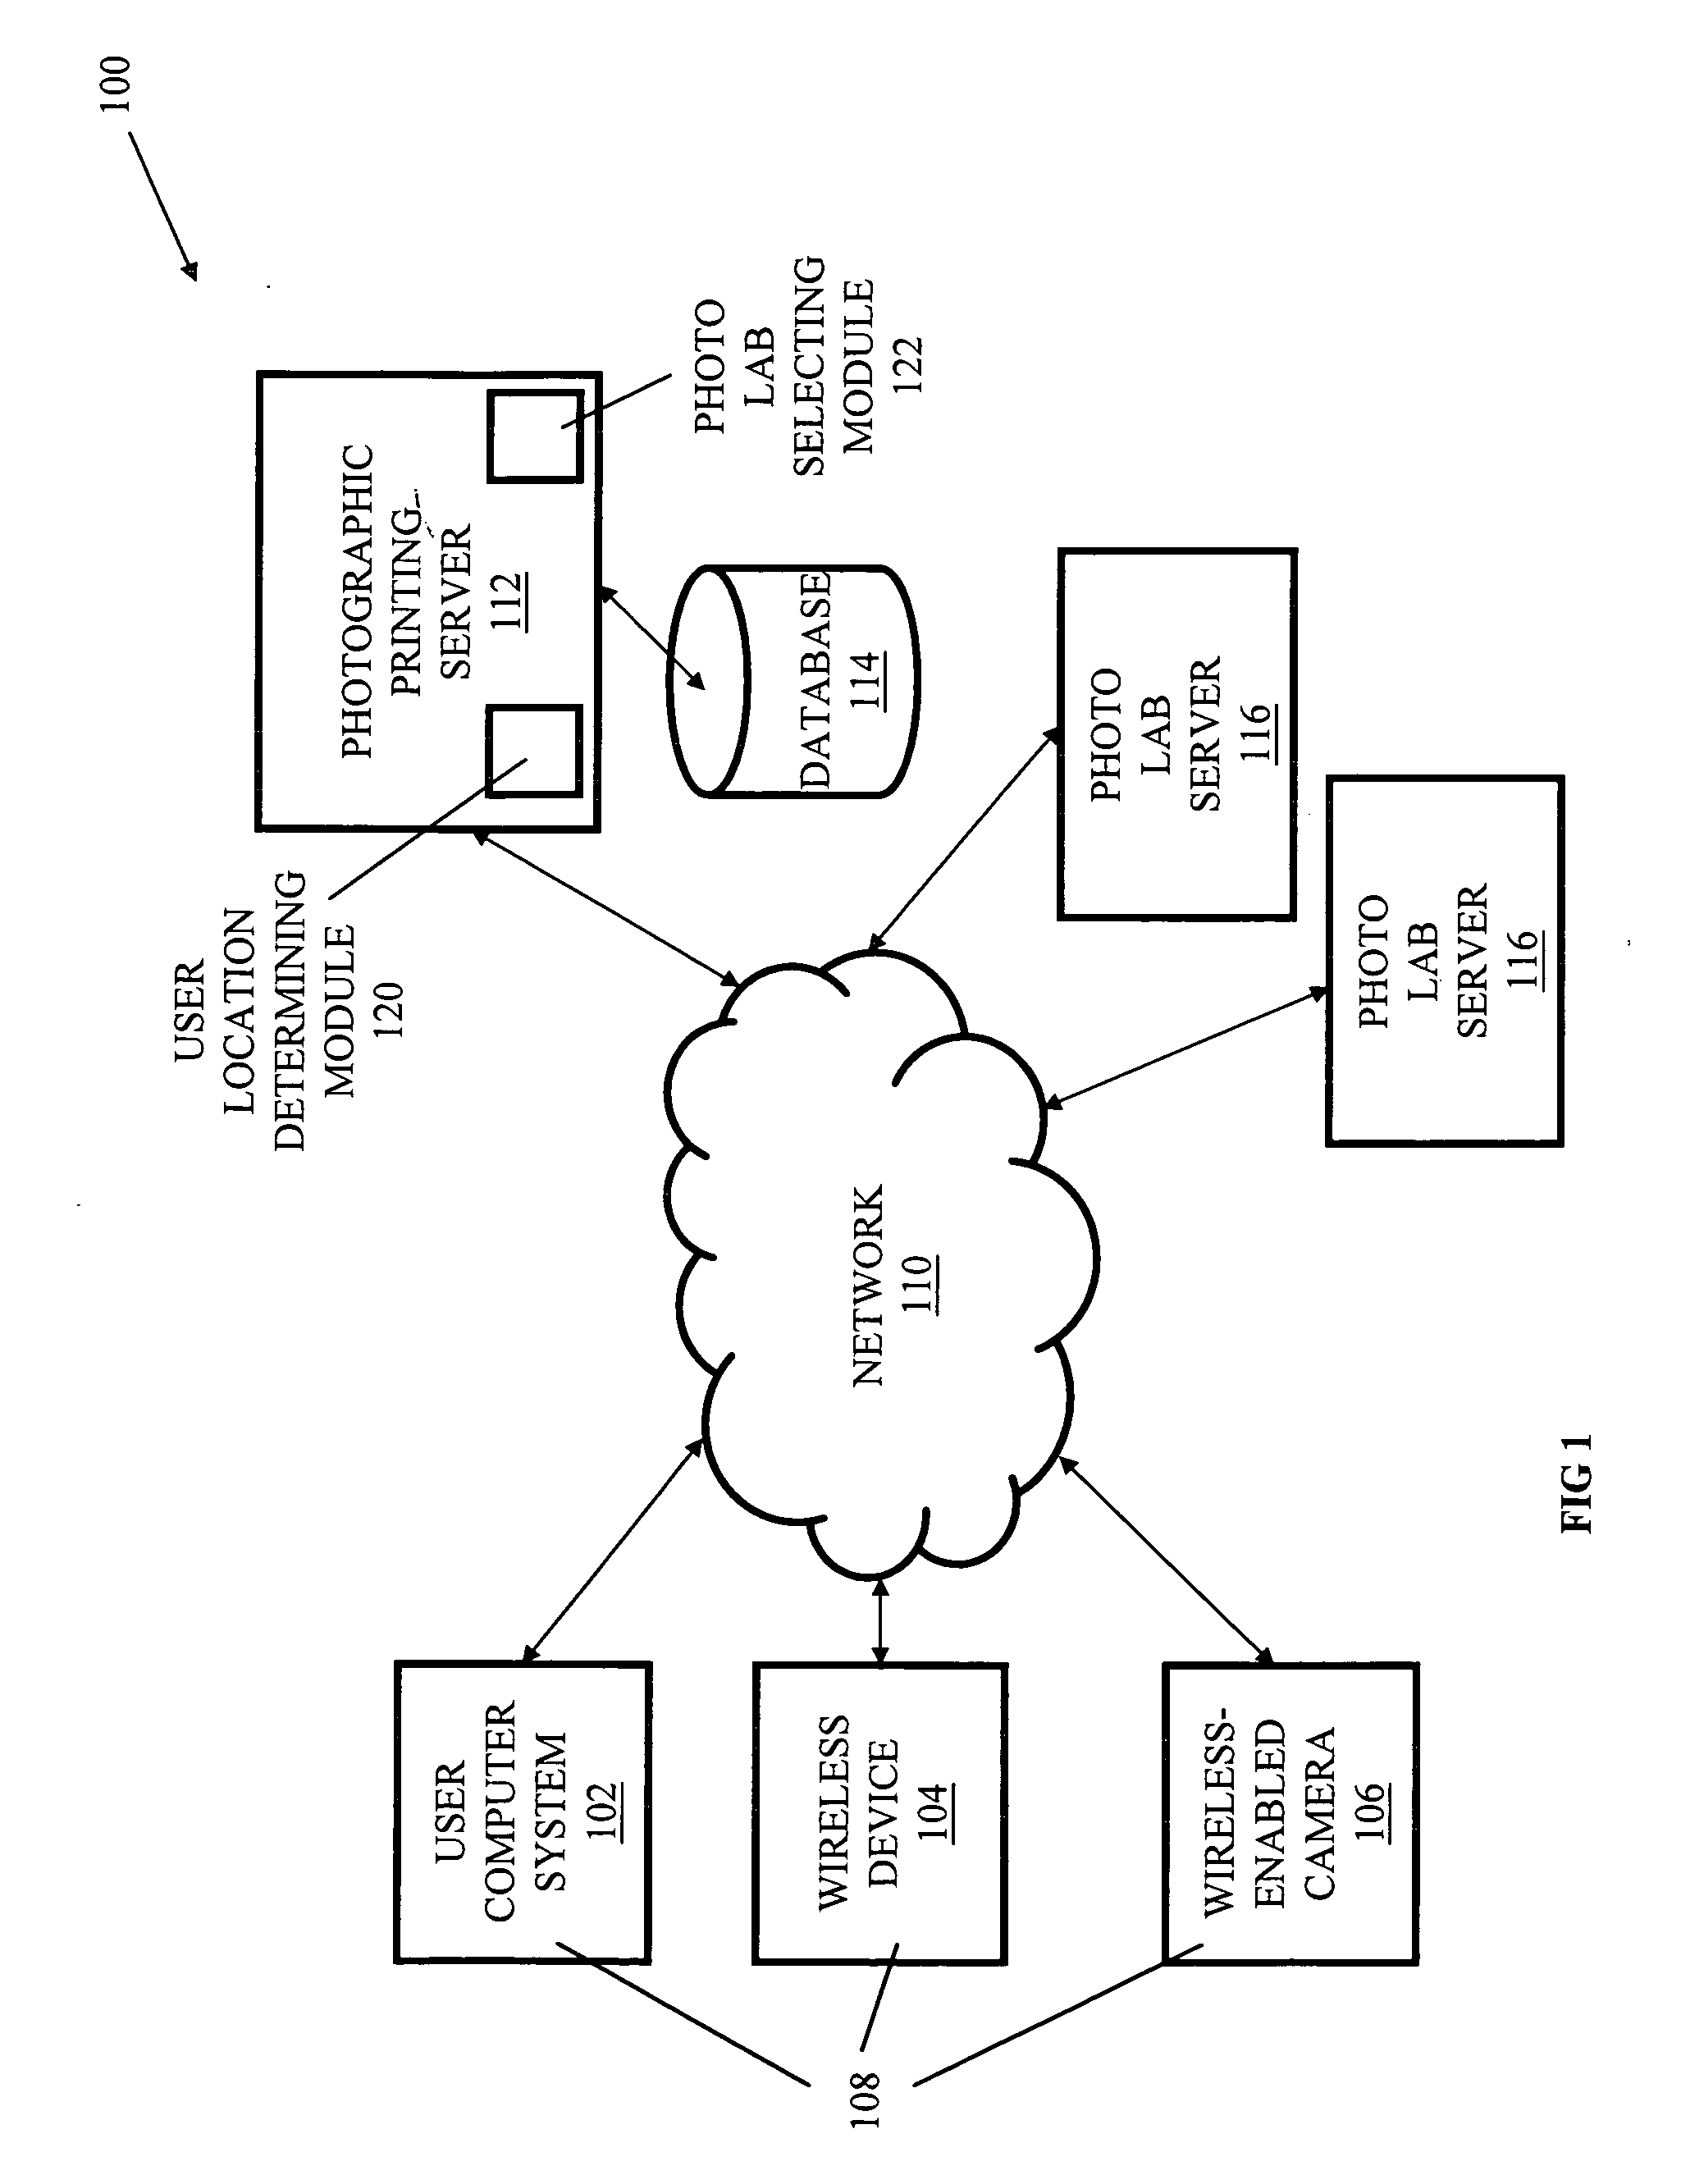 Systems, methods, and media for providing photographic printing